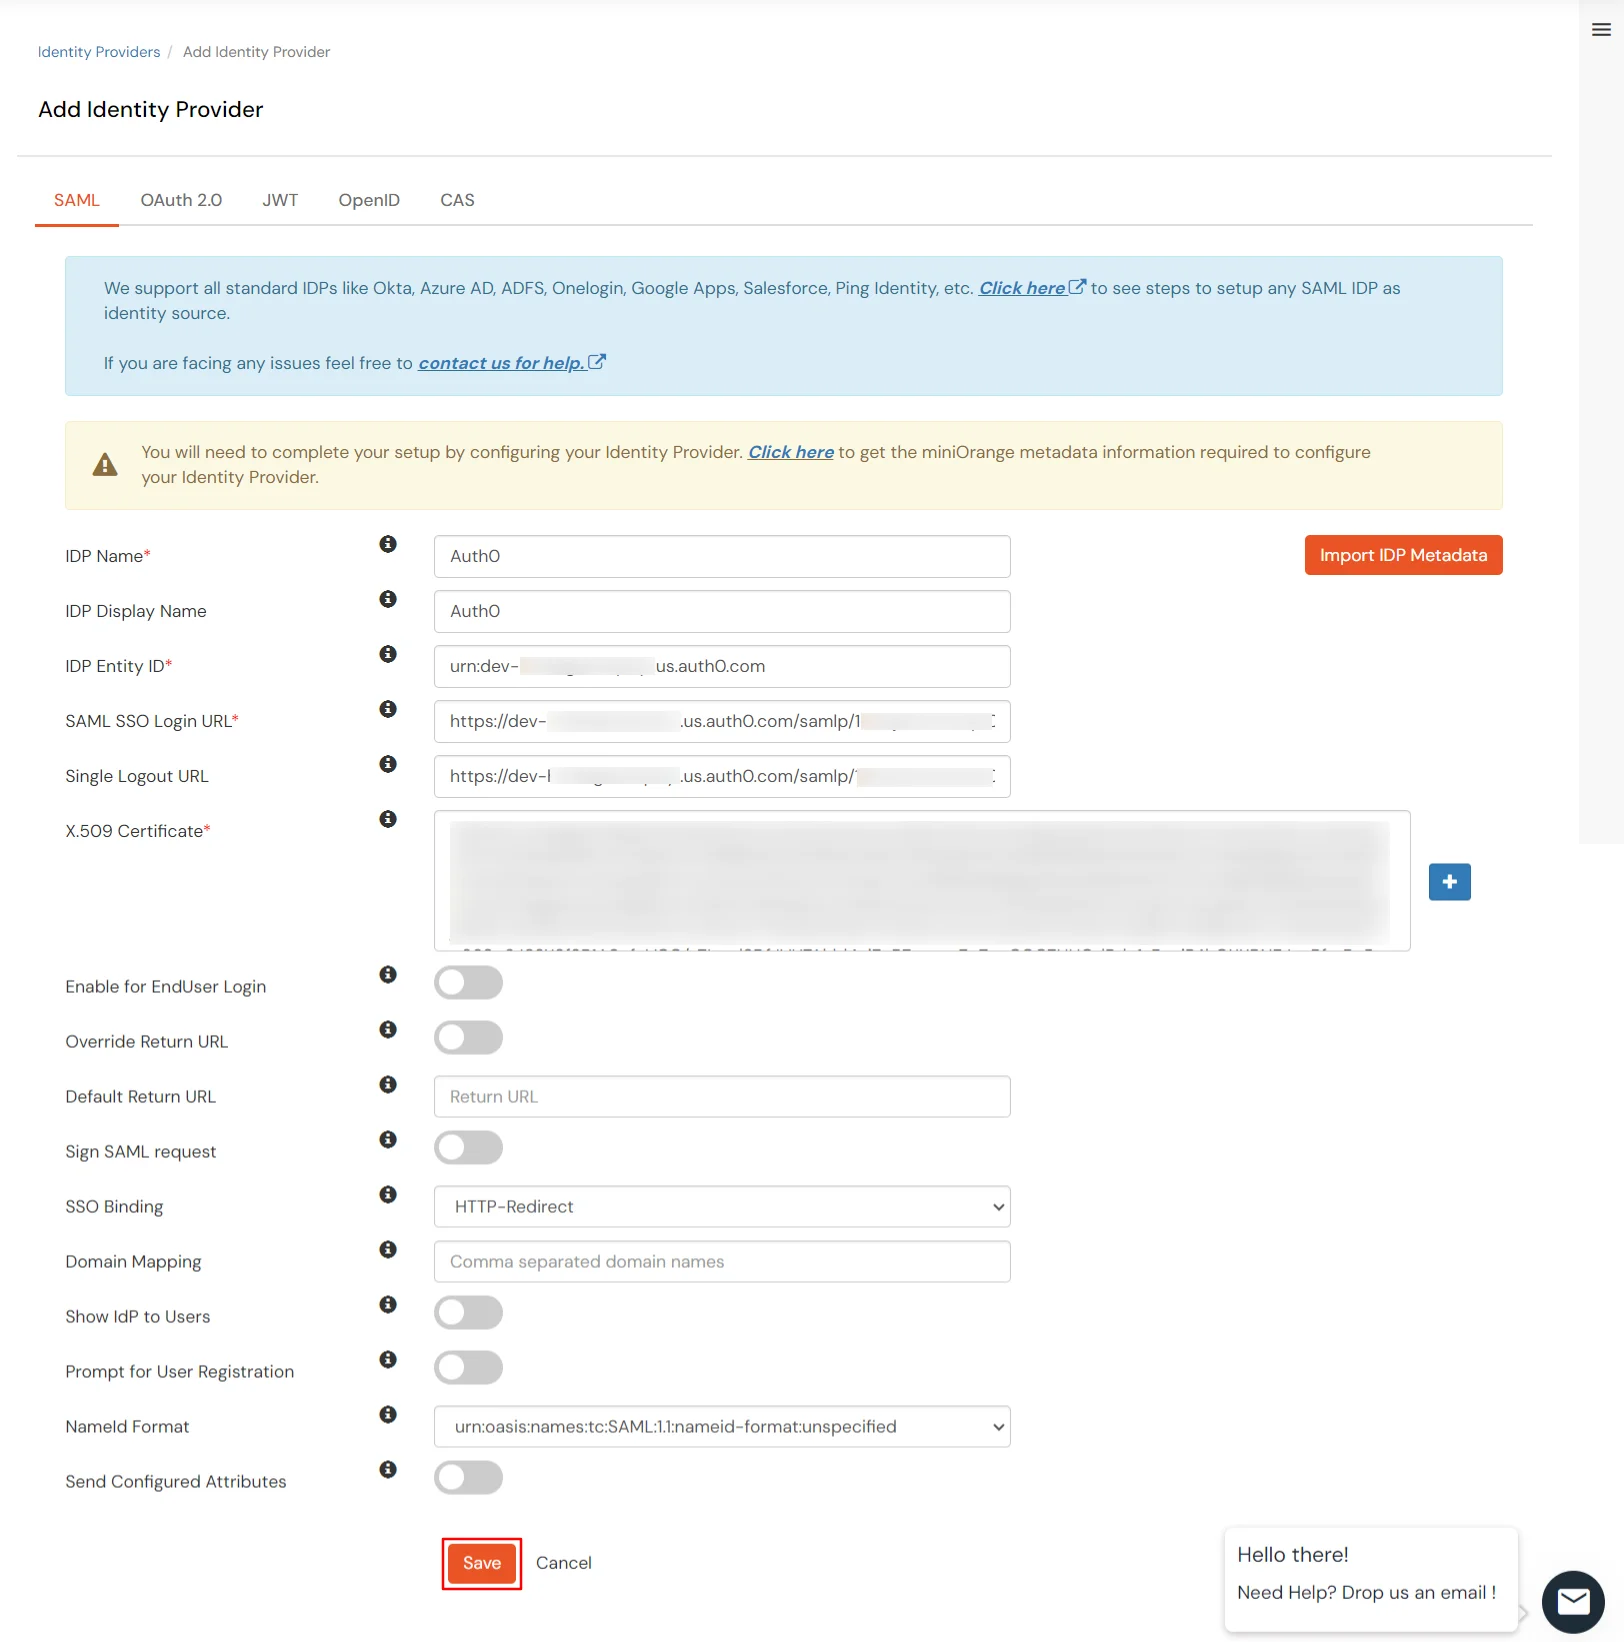 Save Application for Auth0 SSO Login